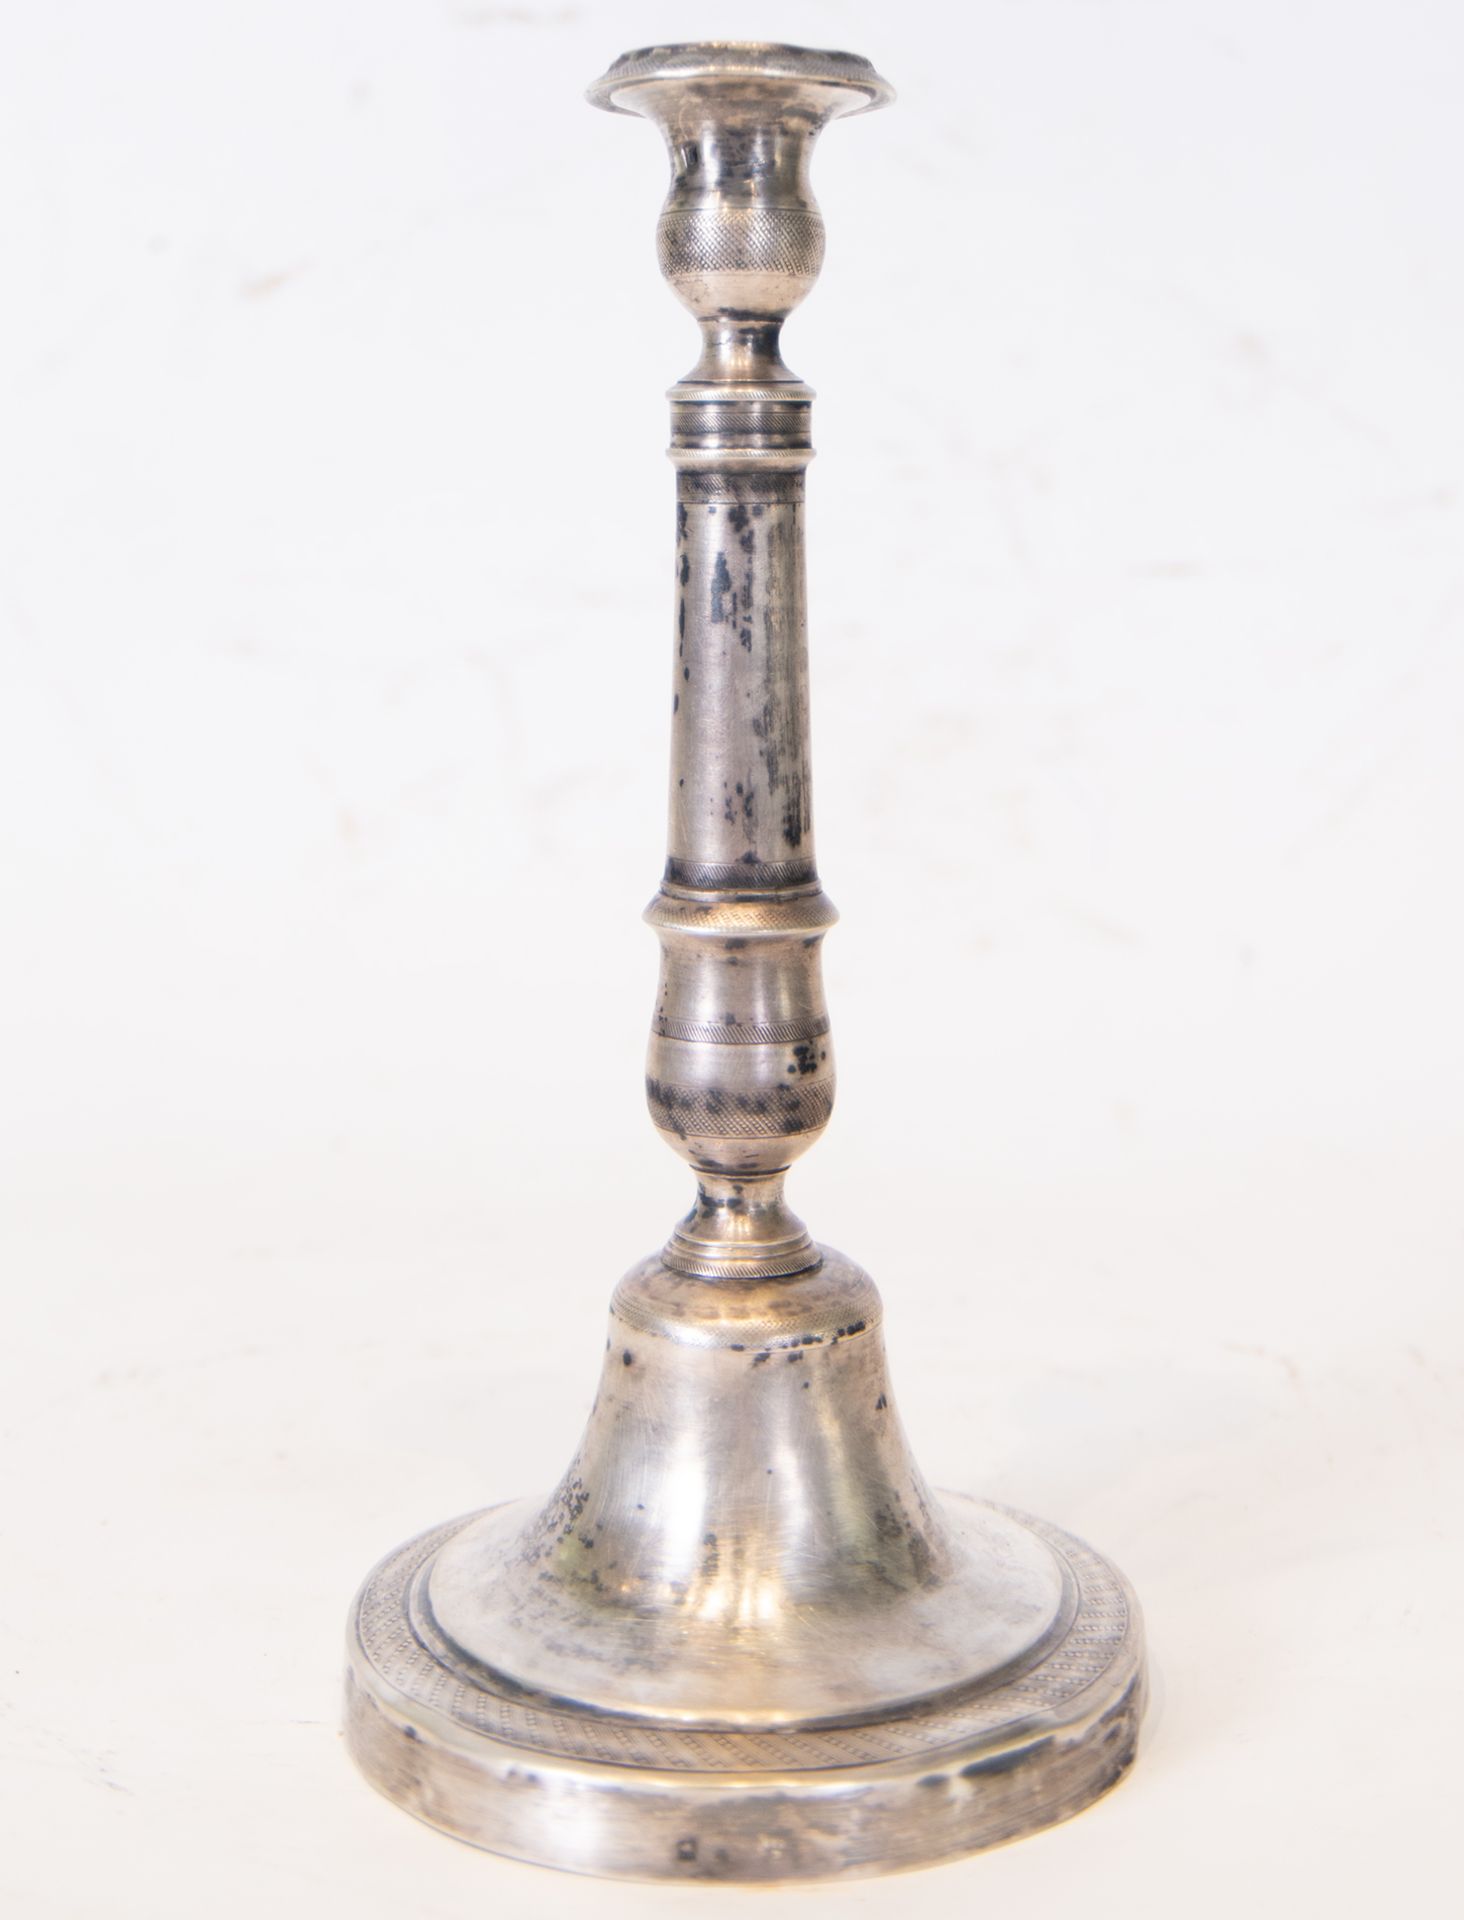 Pair of rare Fernandino candlesticks in solid silver, Spanish school of the 18th - 19th century - Image 2 of 8